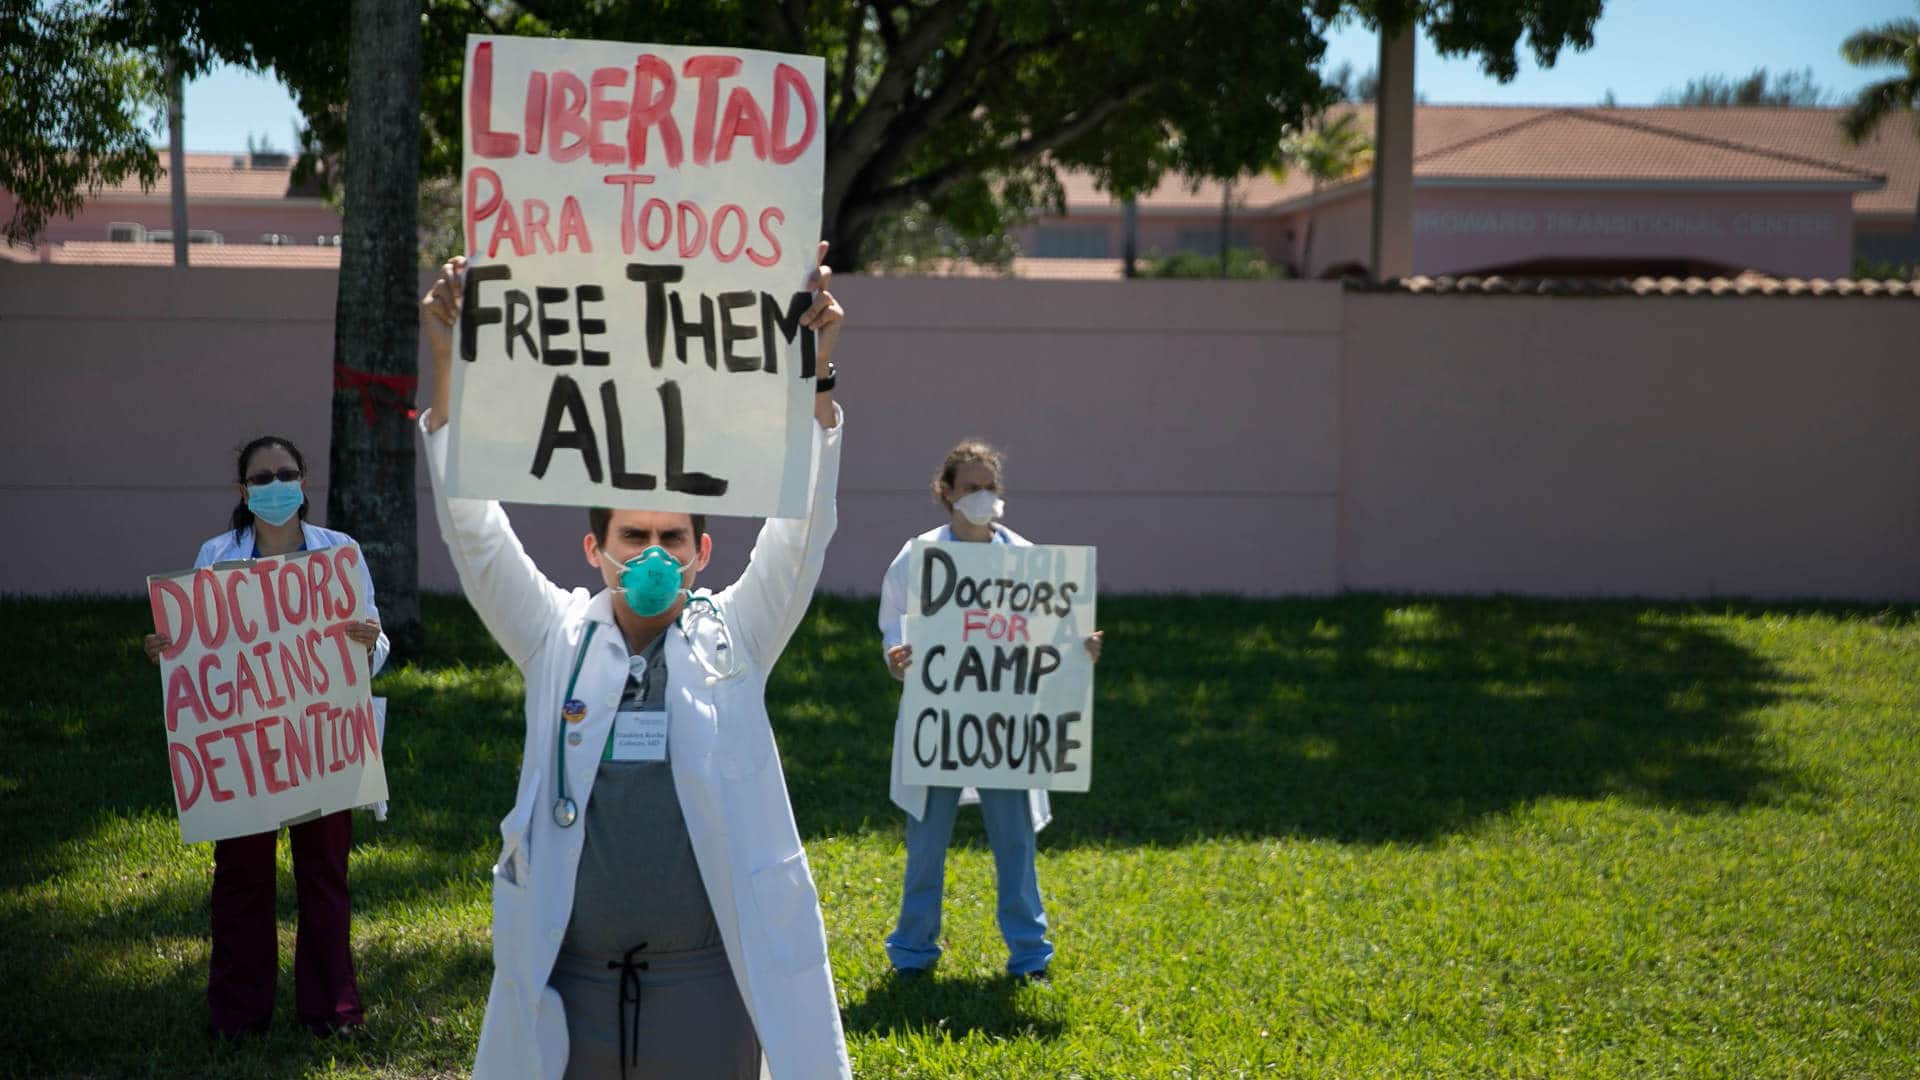 Health professionals protest outside of an ICE facility on May 1, 2020 in Pompano Beach, Florida.